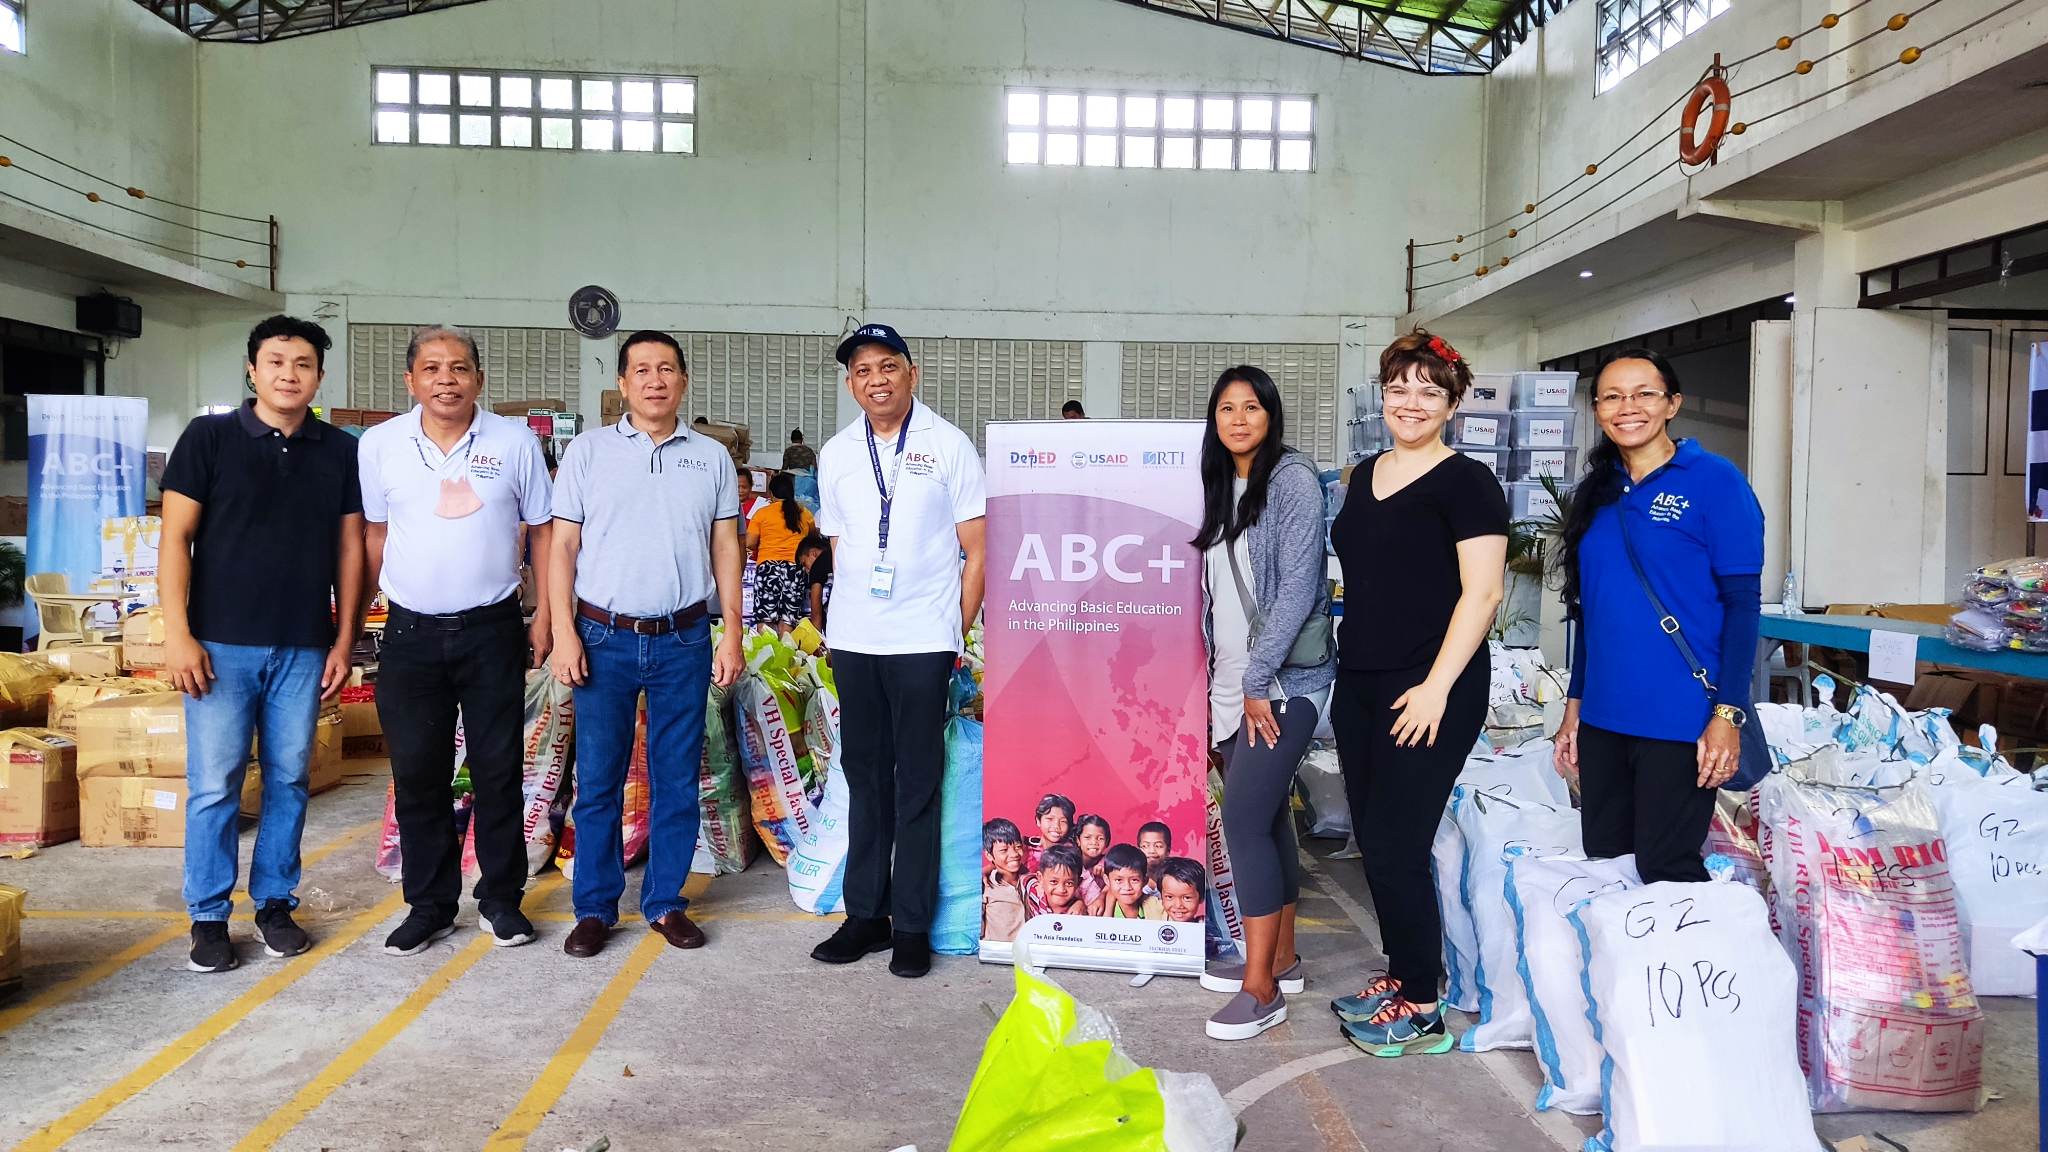 JBLCF-B collaborates with ABC+ Project in providing school supplies to schools affected by natural disasters.